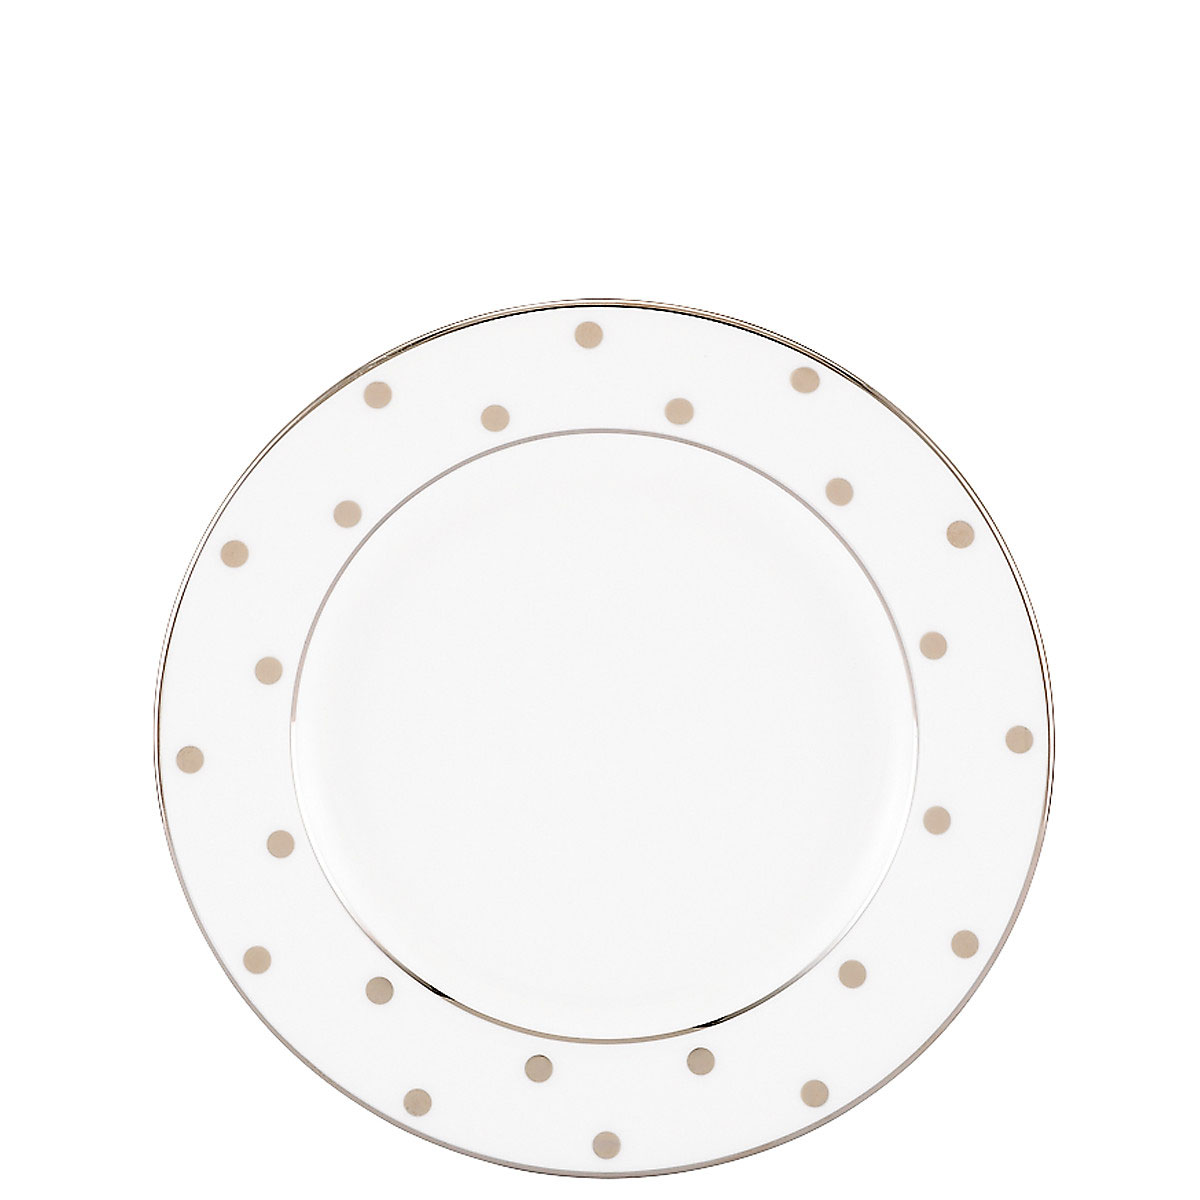 Kate Spade China by Lenox, Larabee Road Platinum Butter Plate